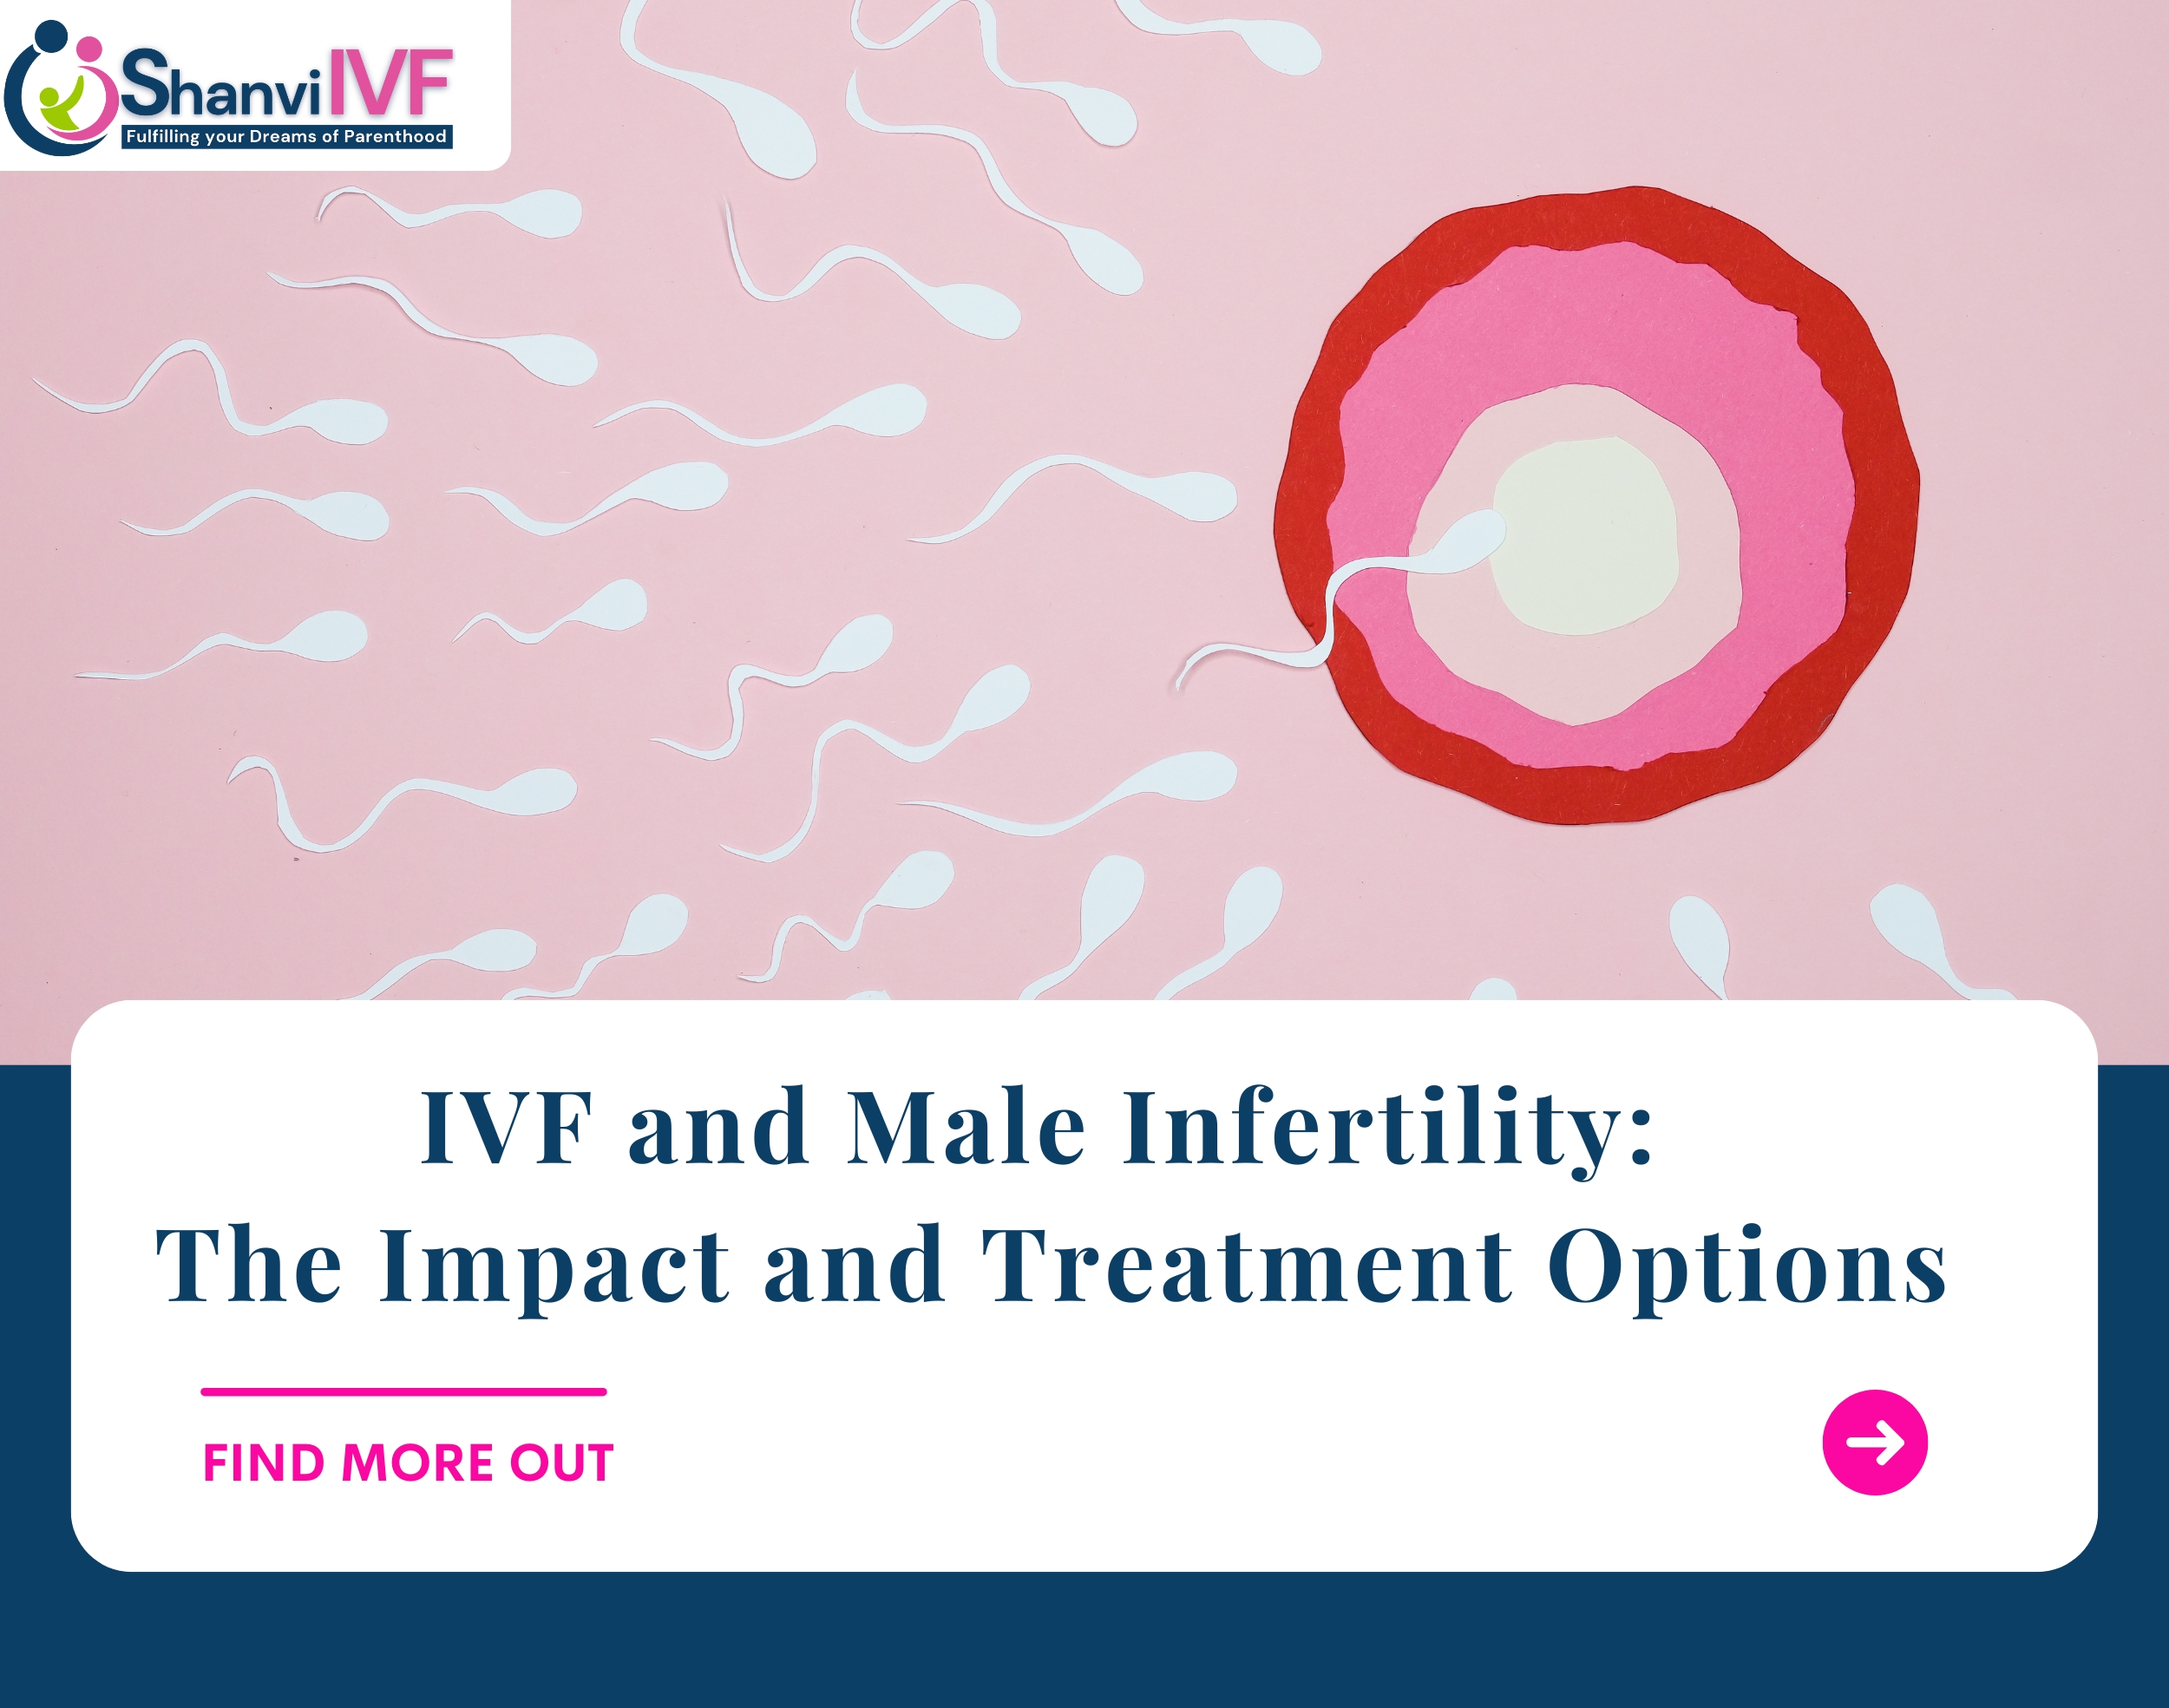 IVF and Male Infertility: The Impact and Treatment Options